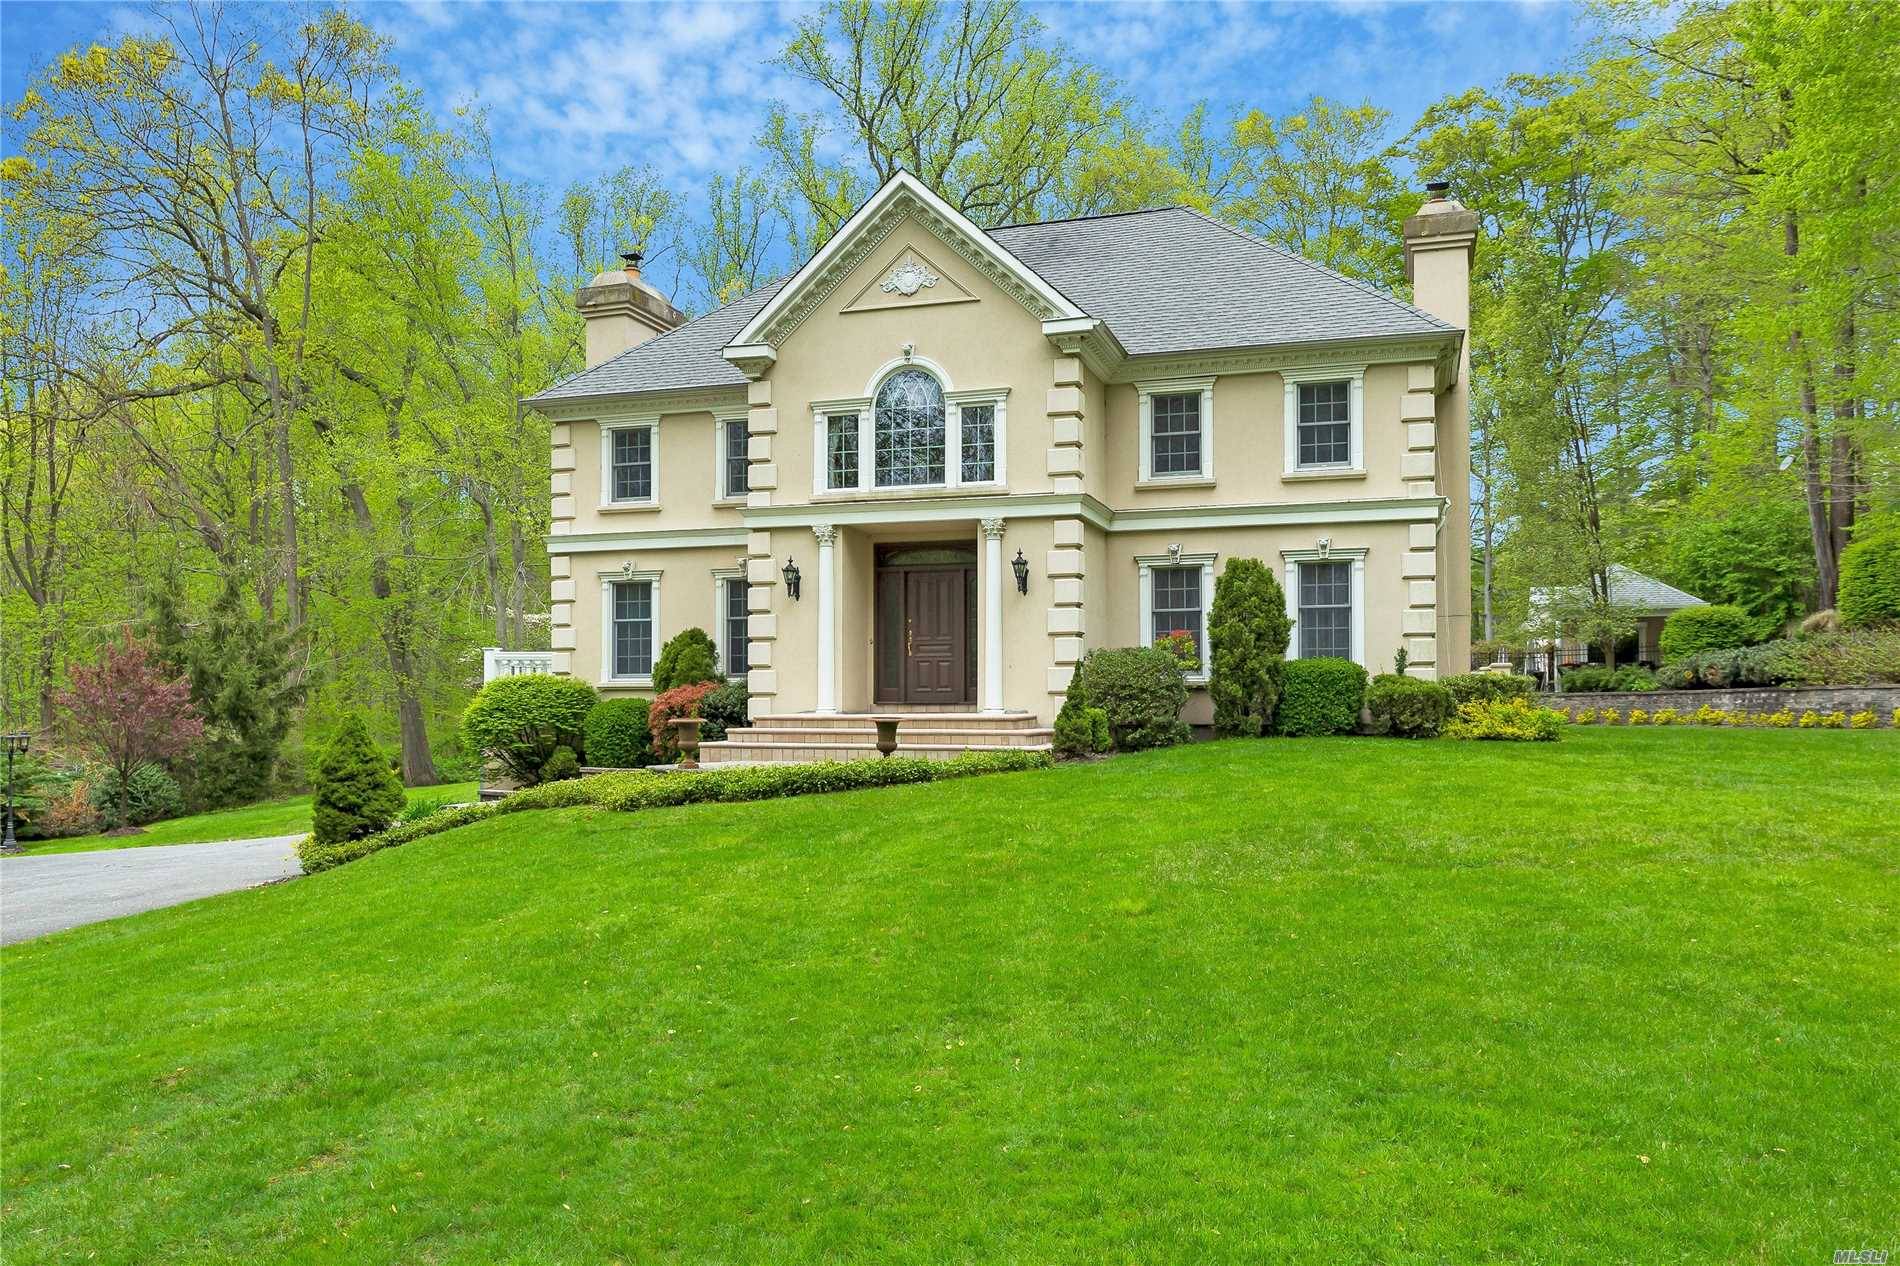 LATTINGTOWN. Stately Young Stucco Colonial Set On Over 2 Private and Serene Acres In Lattingtown.